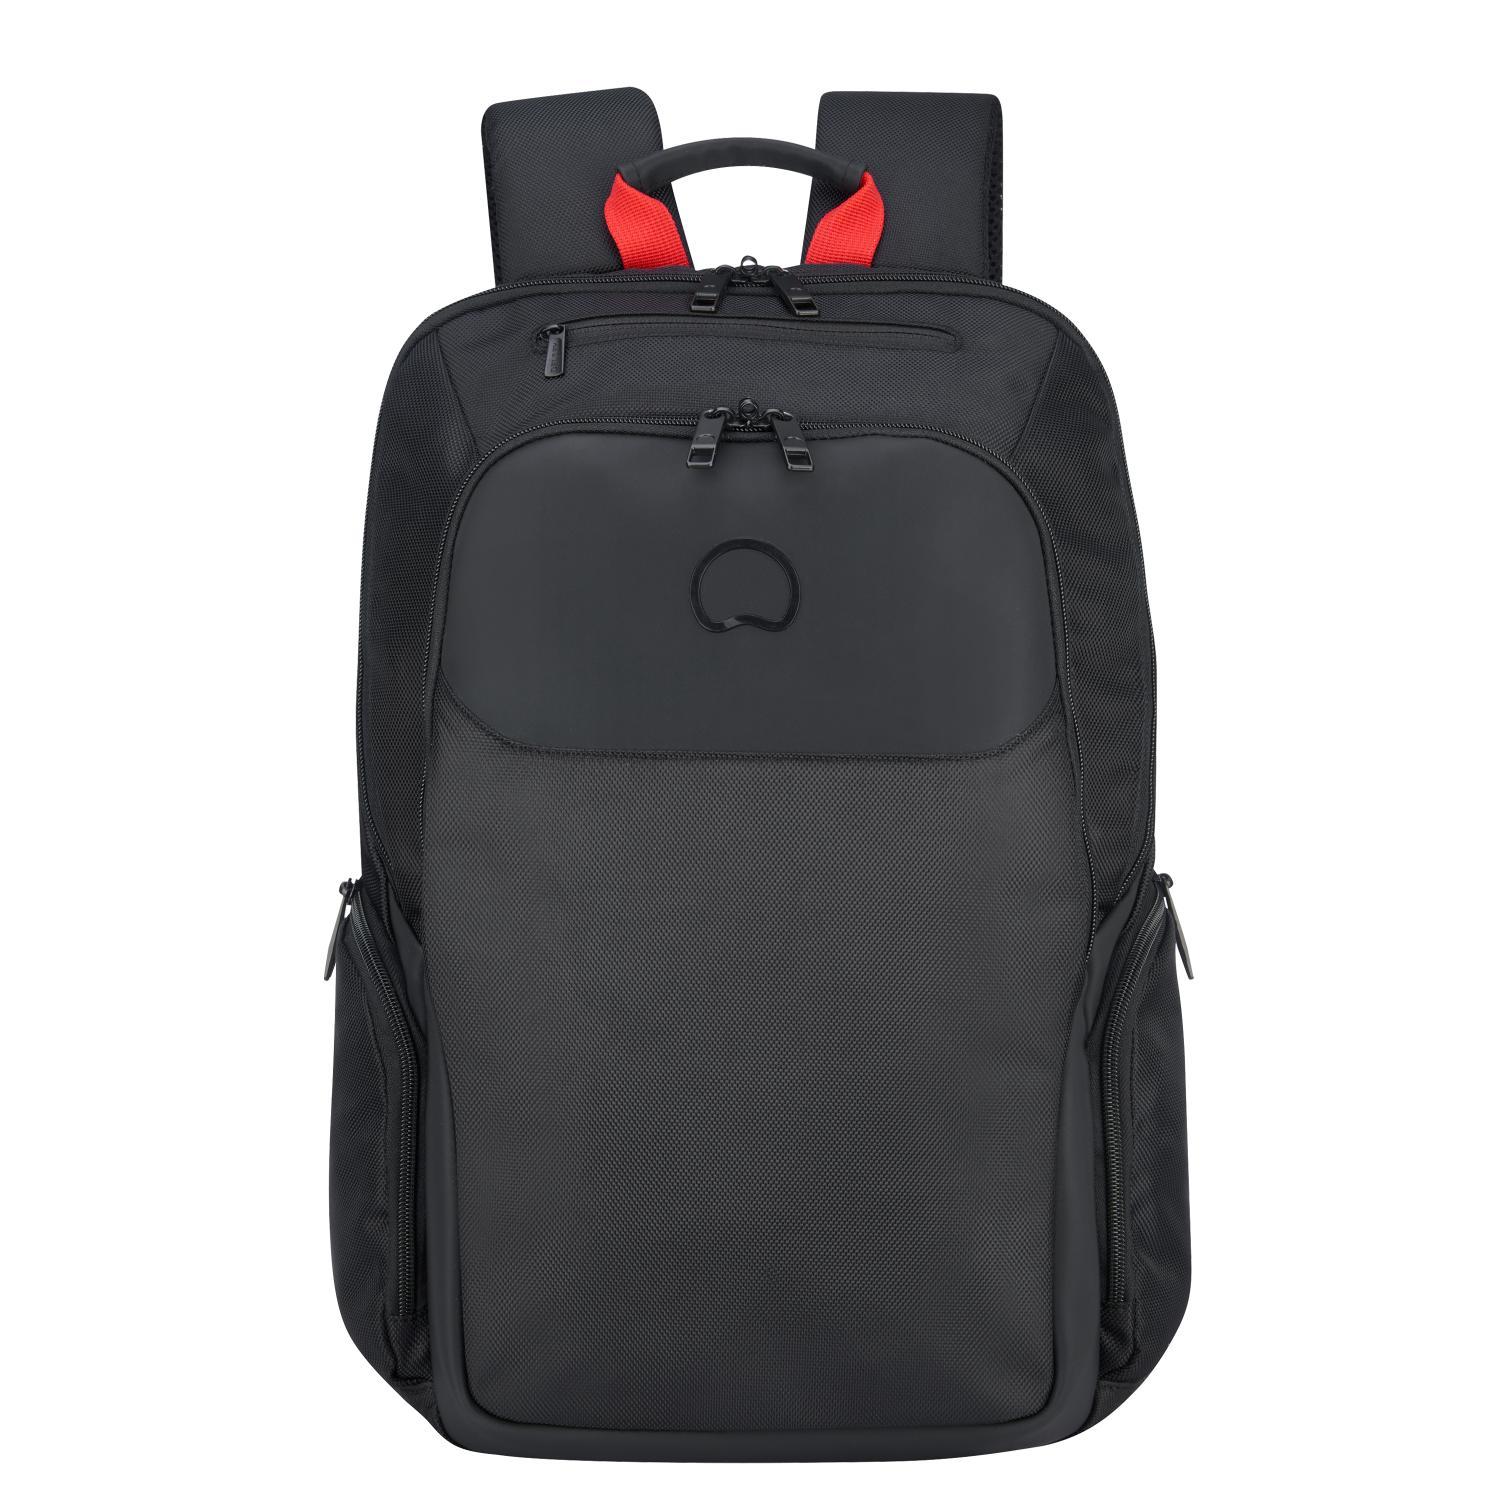 Delsey Parvis+ 2 Compartment Backpack Laptop 13.3 Inch Black - 00394460300 